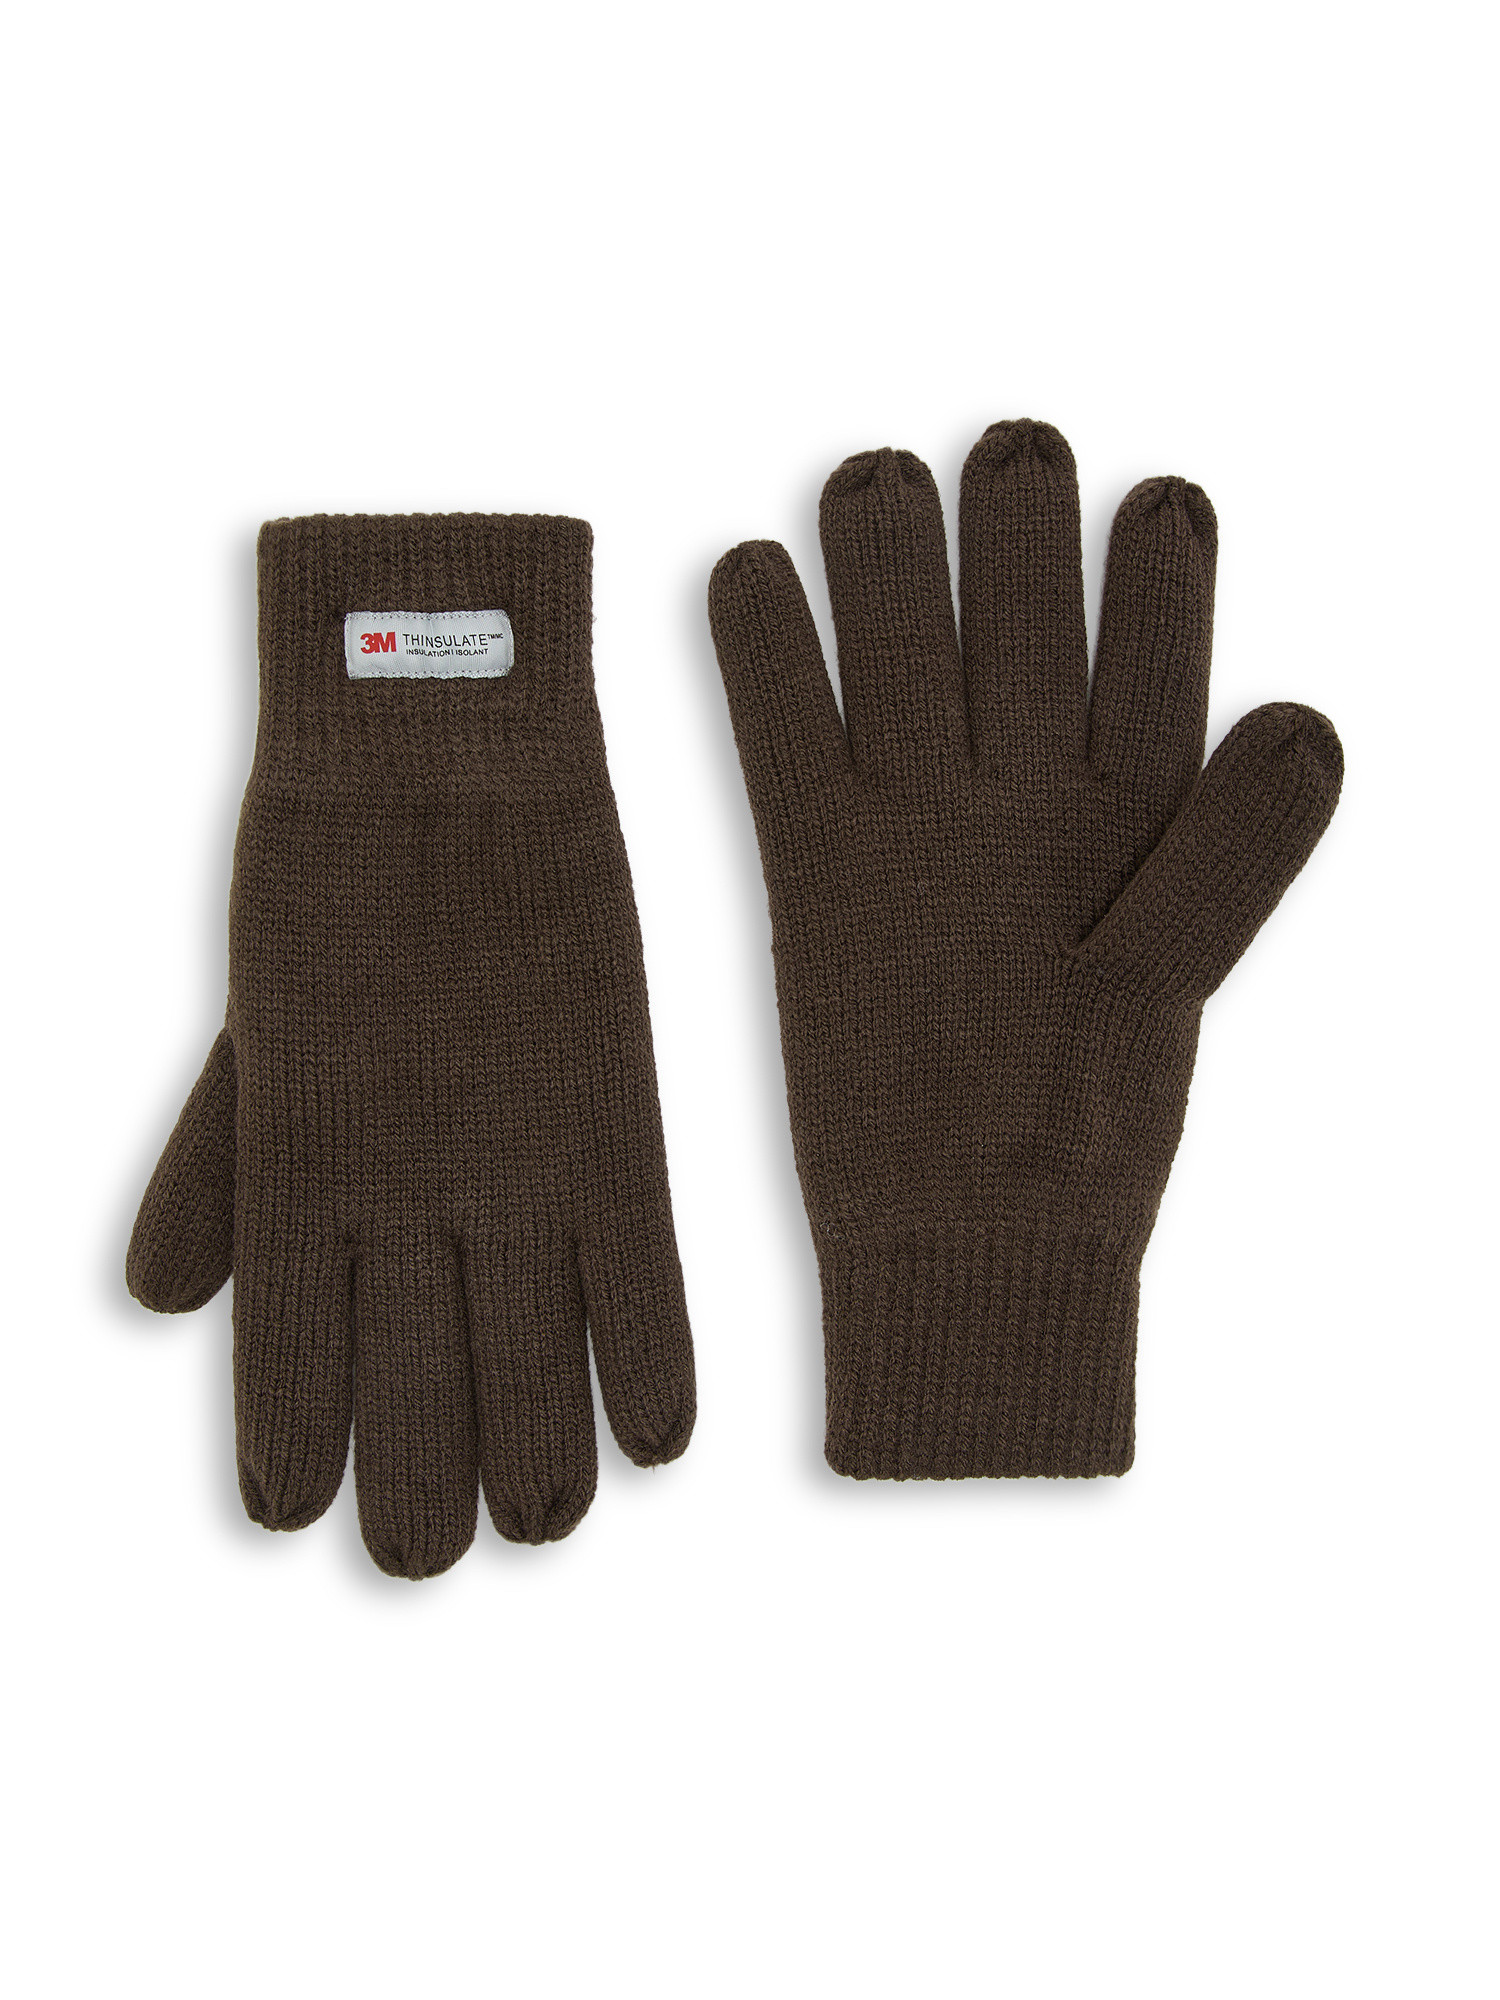 Luca D'Altieri - Knitted gloves, Brown, large image number 0